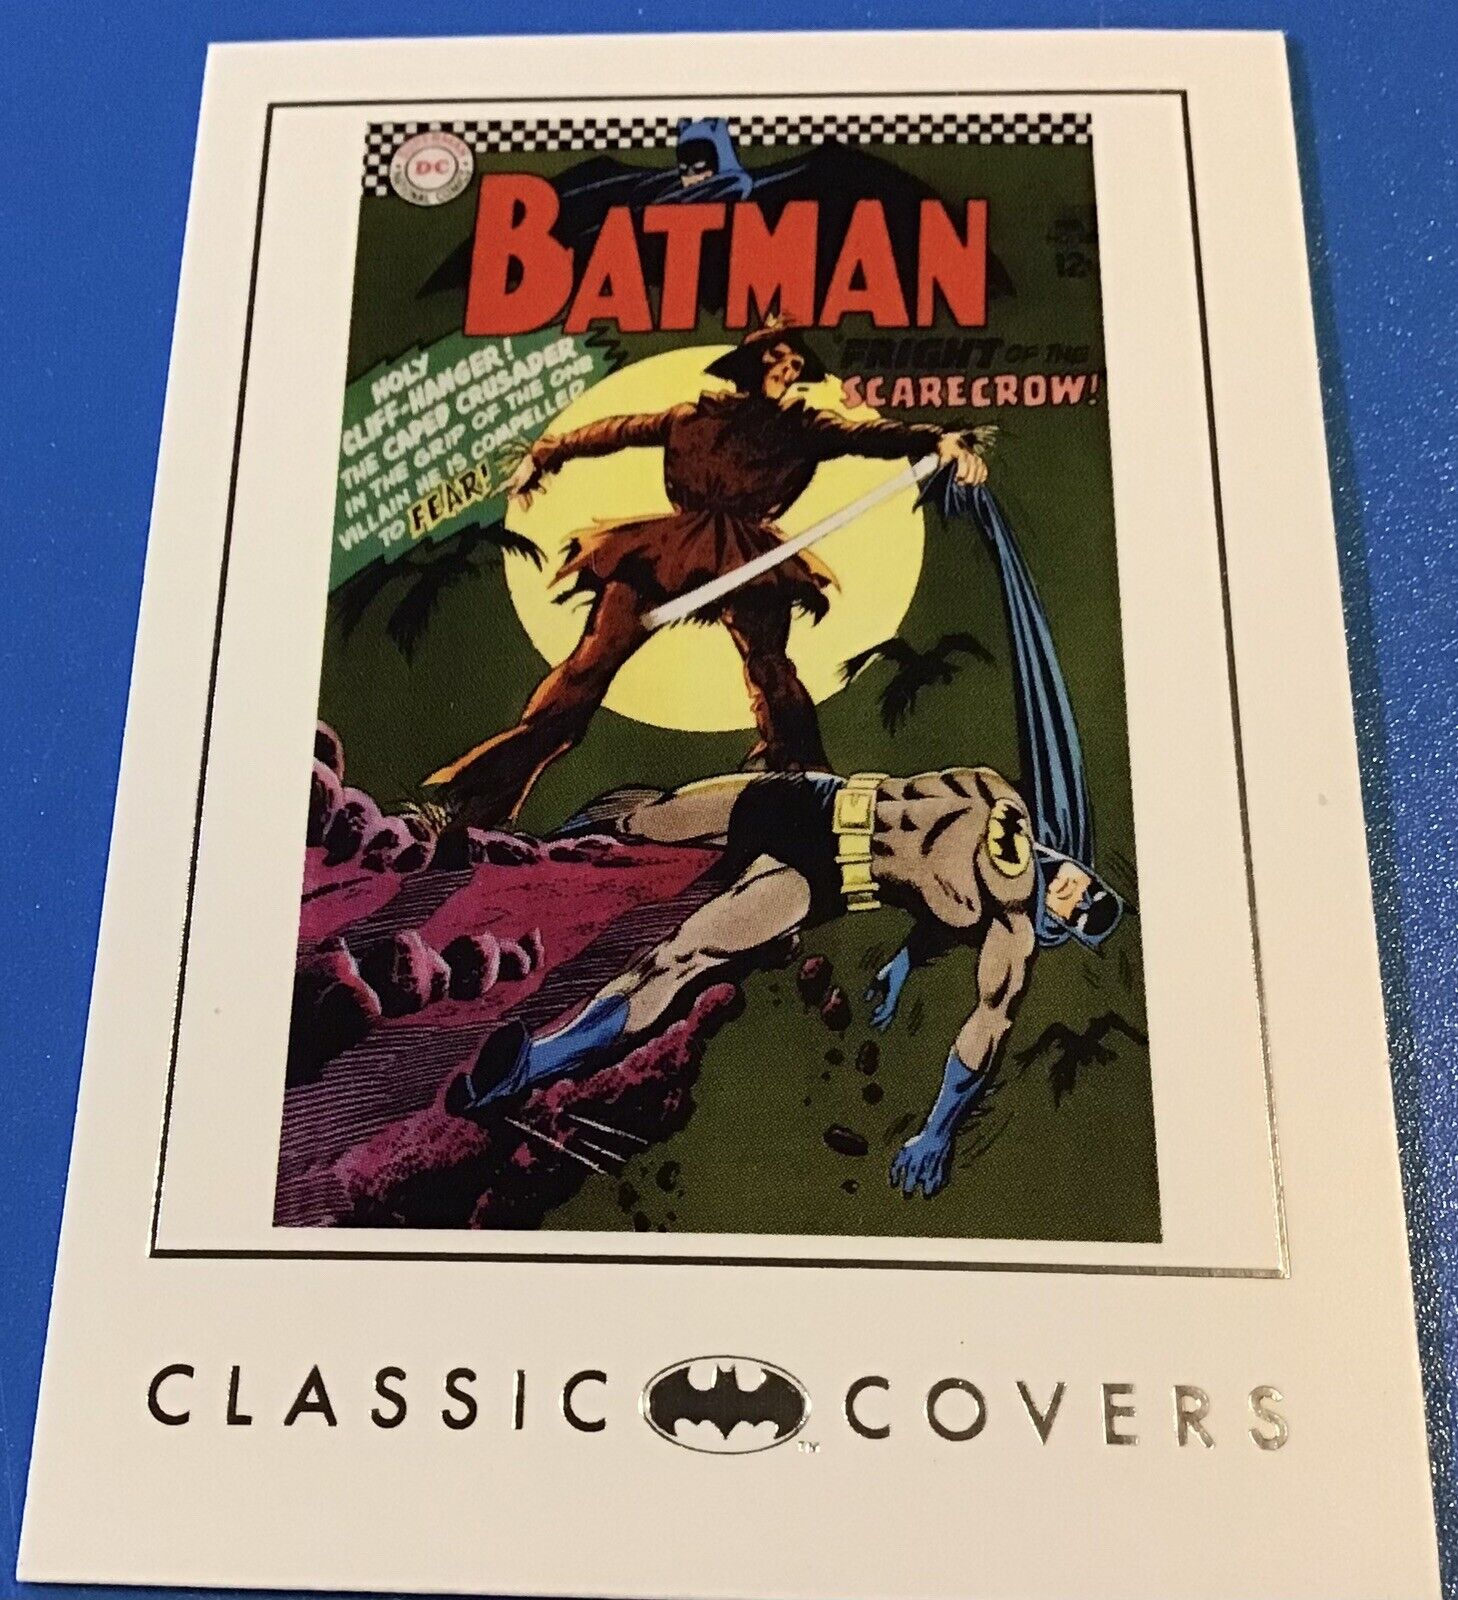 2008 BATMAN ARCHIVES CLASSIC COVERS BASE CARD #23 issue 189 first published 1967